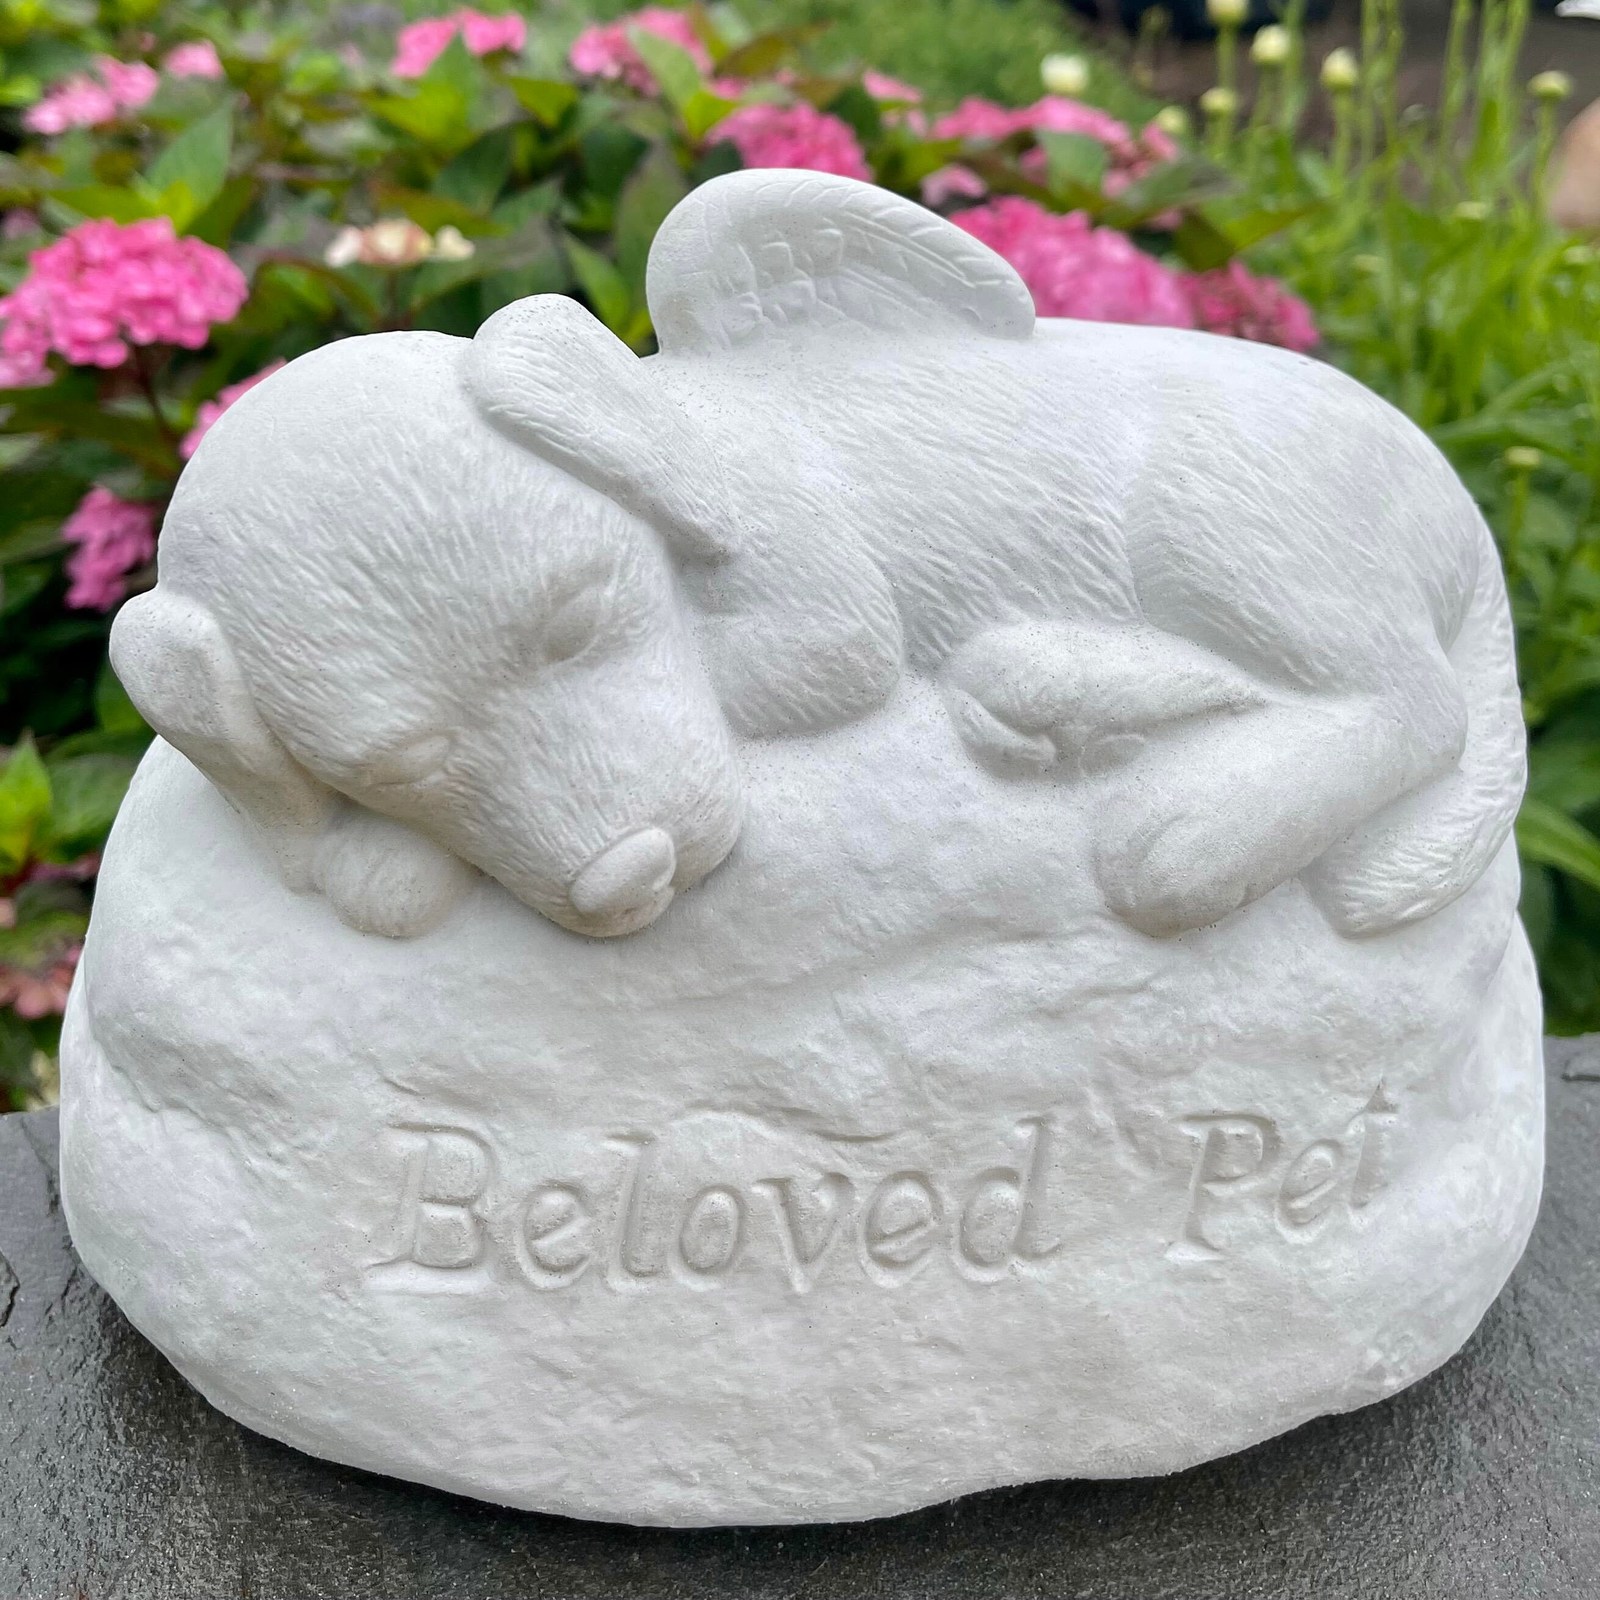 Primary image for Outdoor Dog Memorial For Garden 9" Concrete Puppy Angel Cement Statue Stone Head